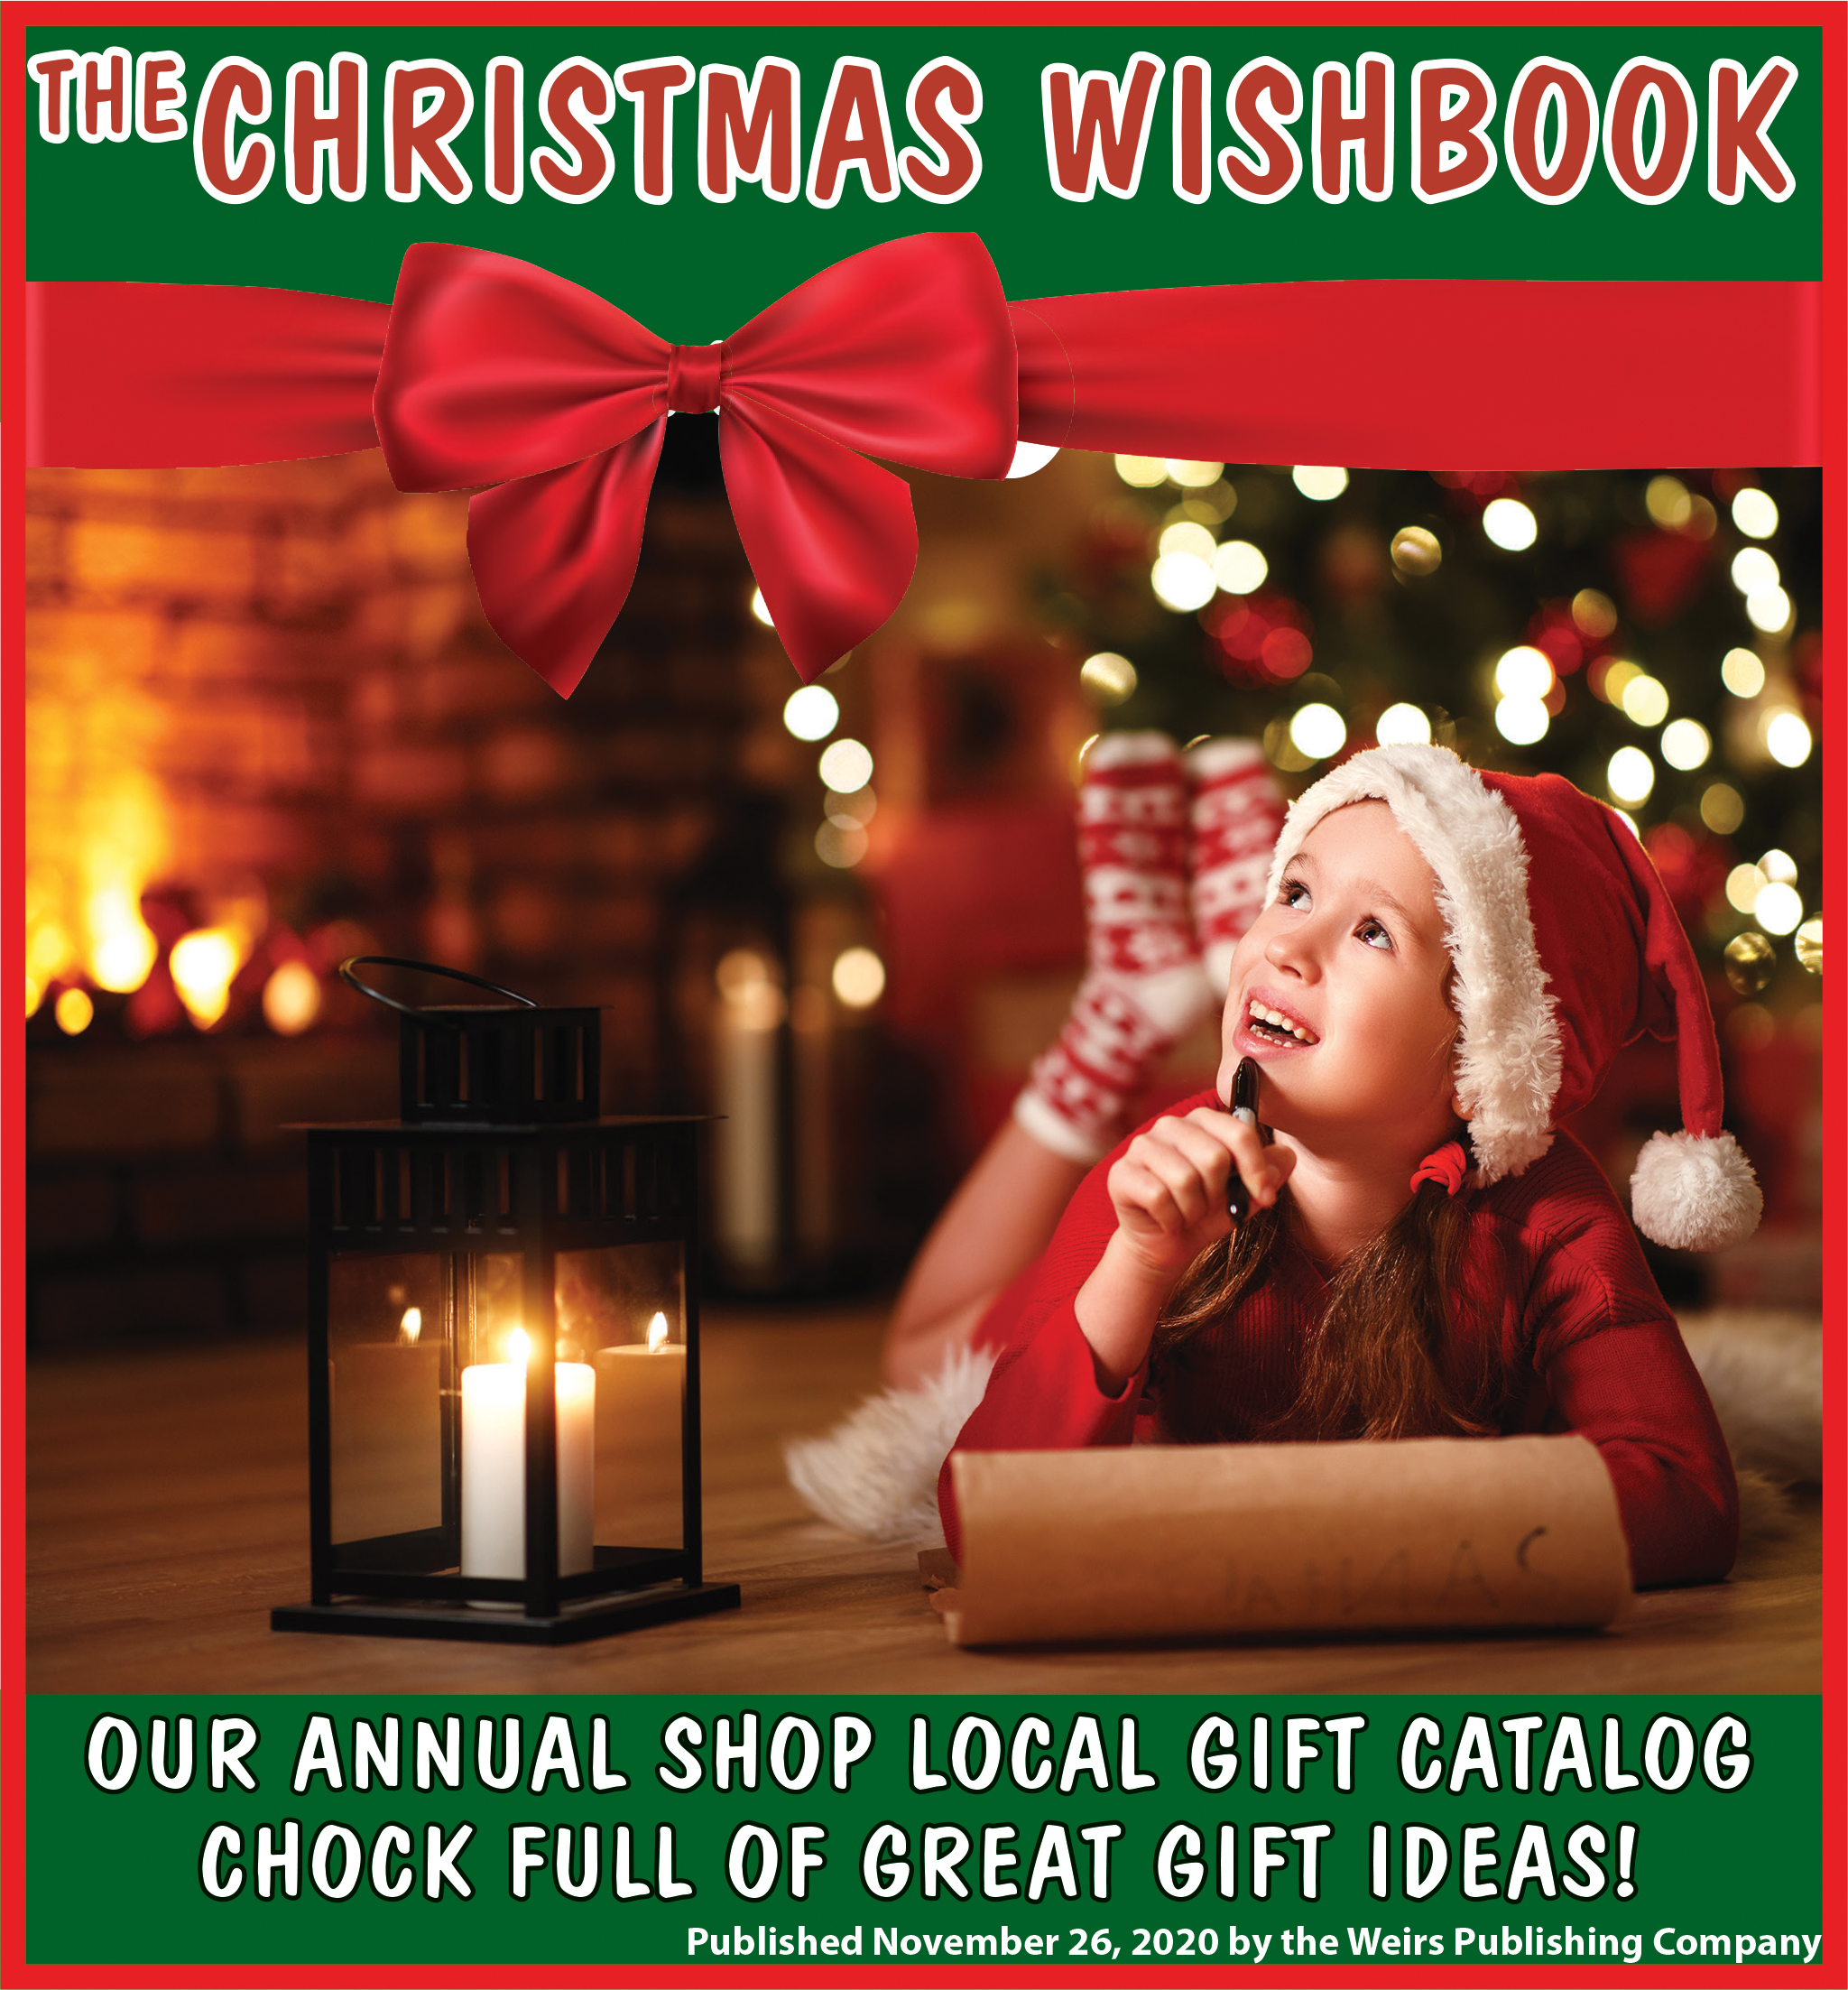 Shop Local Gift Ideas From Our Christmas Wishbook!